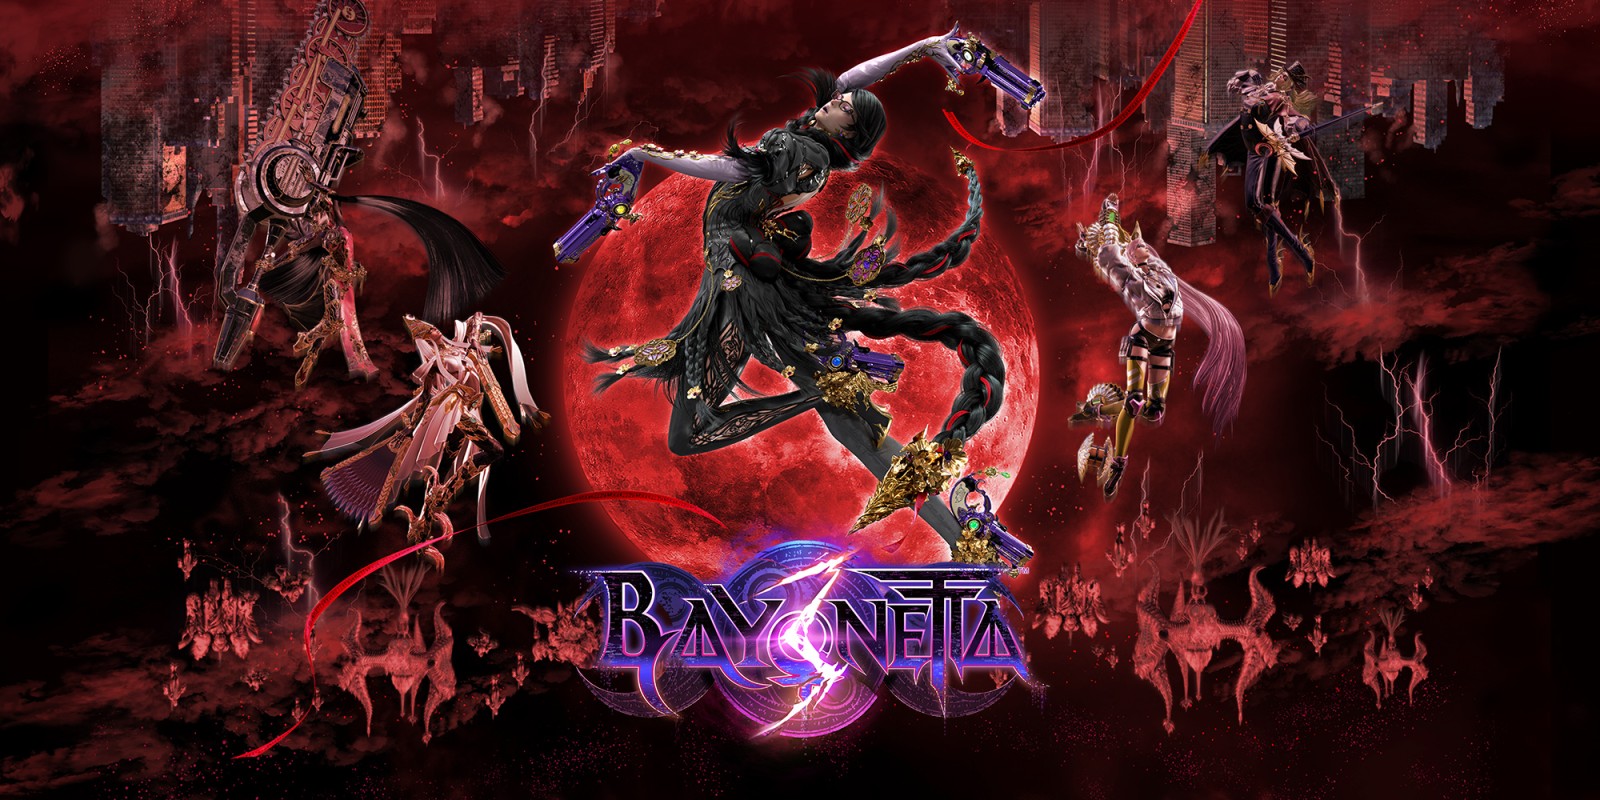 Persona-lly I Like October, so Nier to Fans of Summer 2x1_NSwitch_Bayonetta3_image1600w